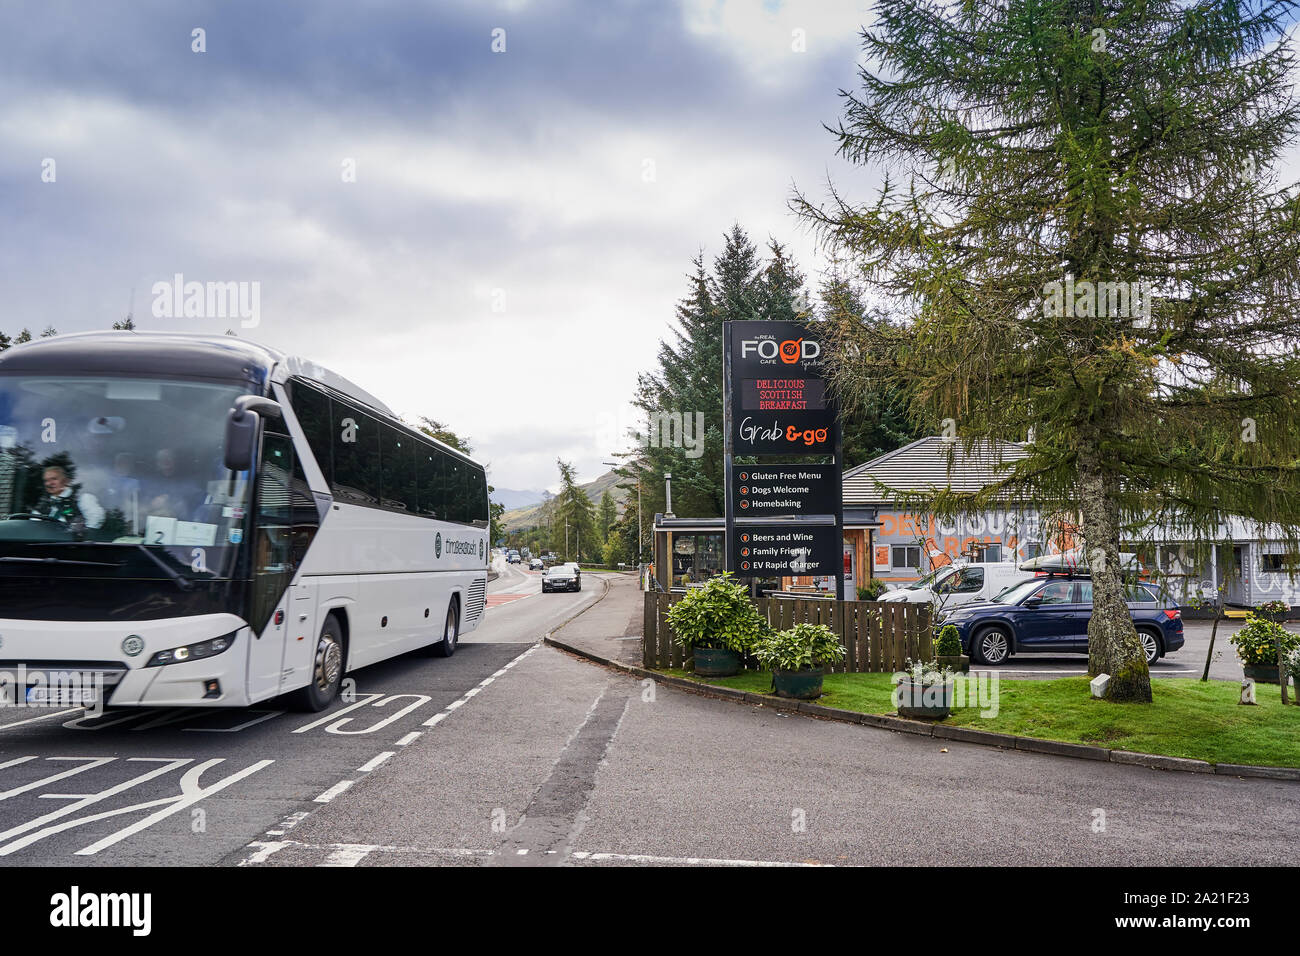 The Real Food Cafe, Tyndrum, Crianlarich, Scotland showing main street. Stock Photo